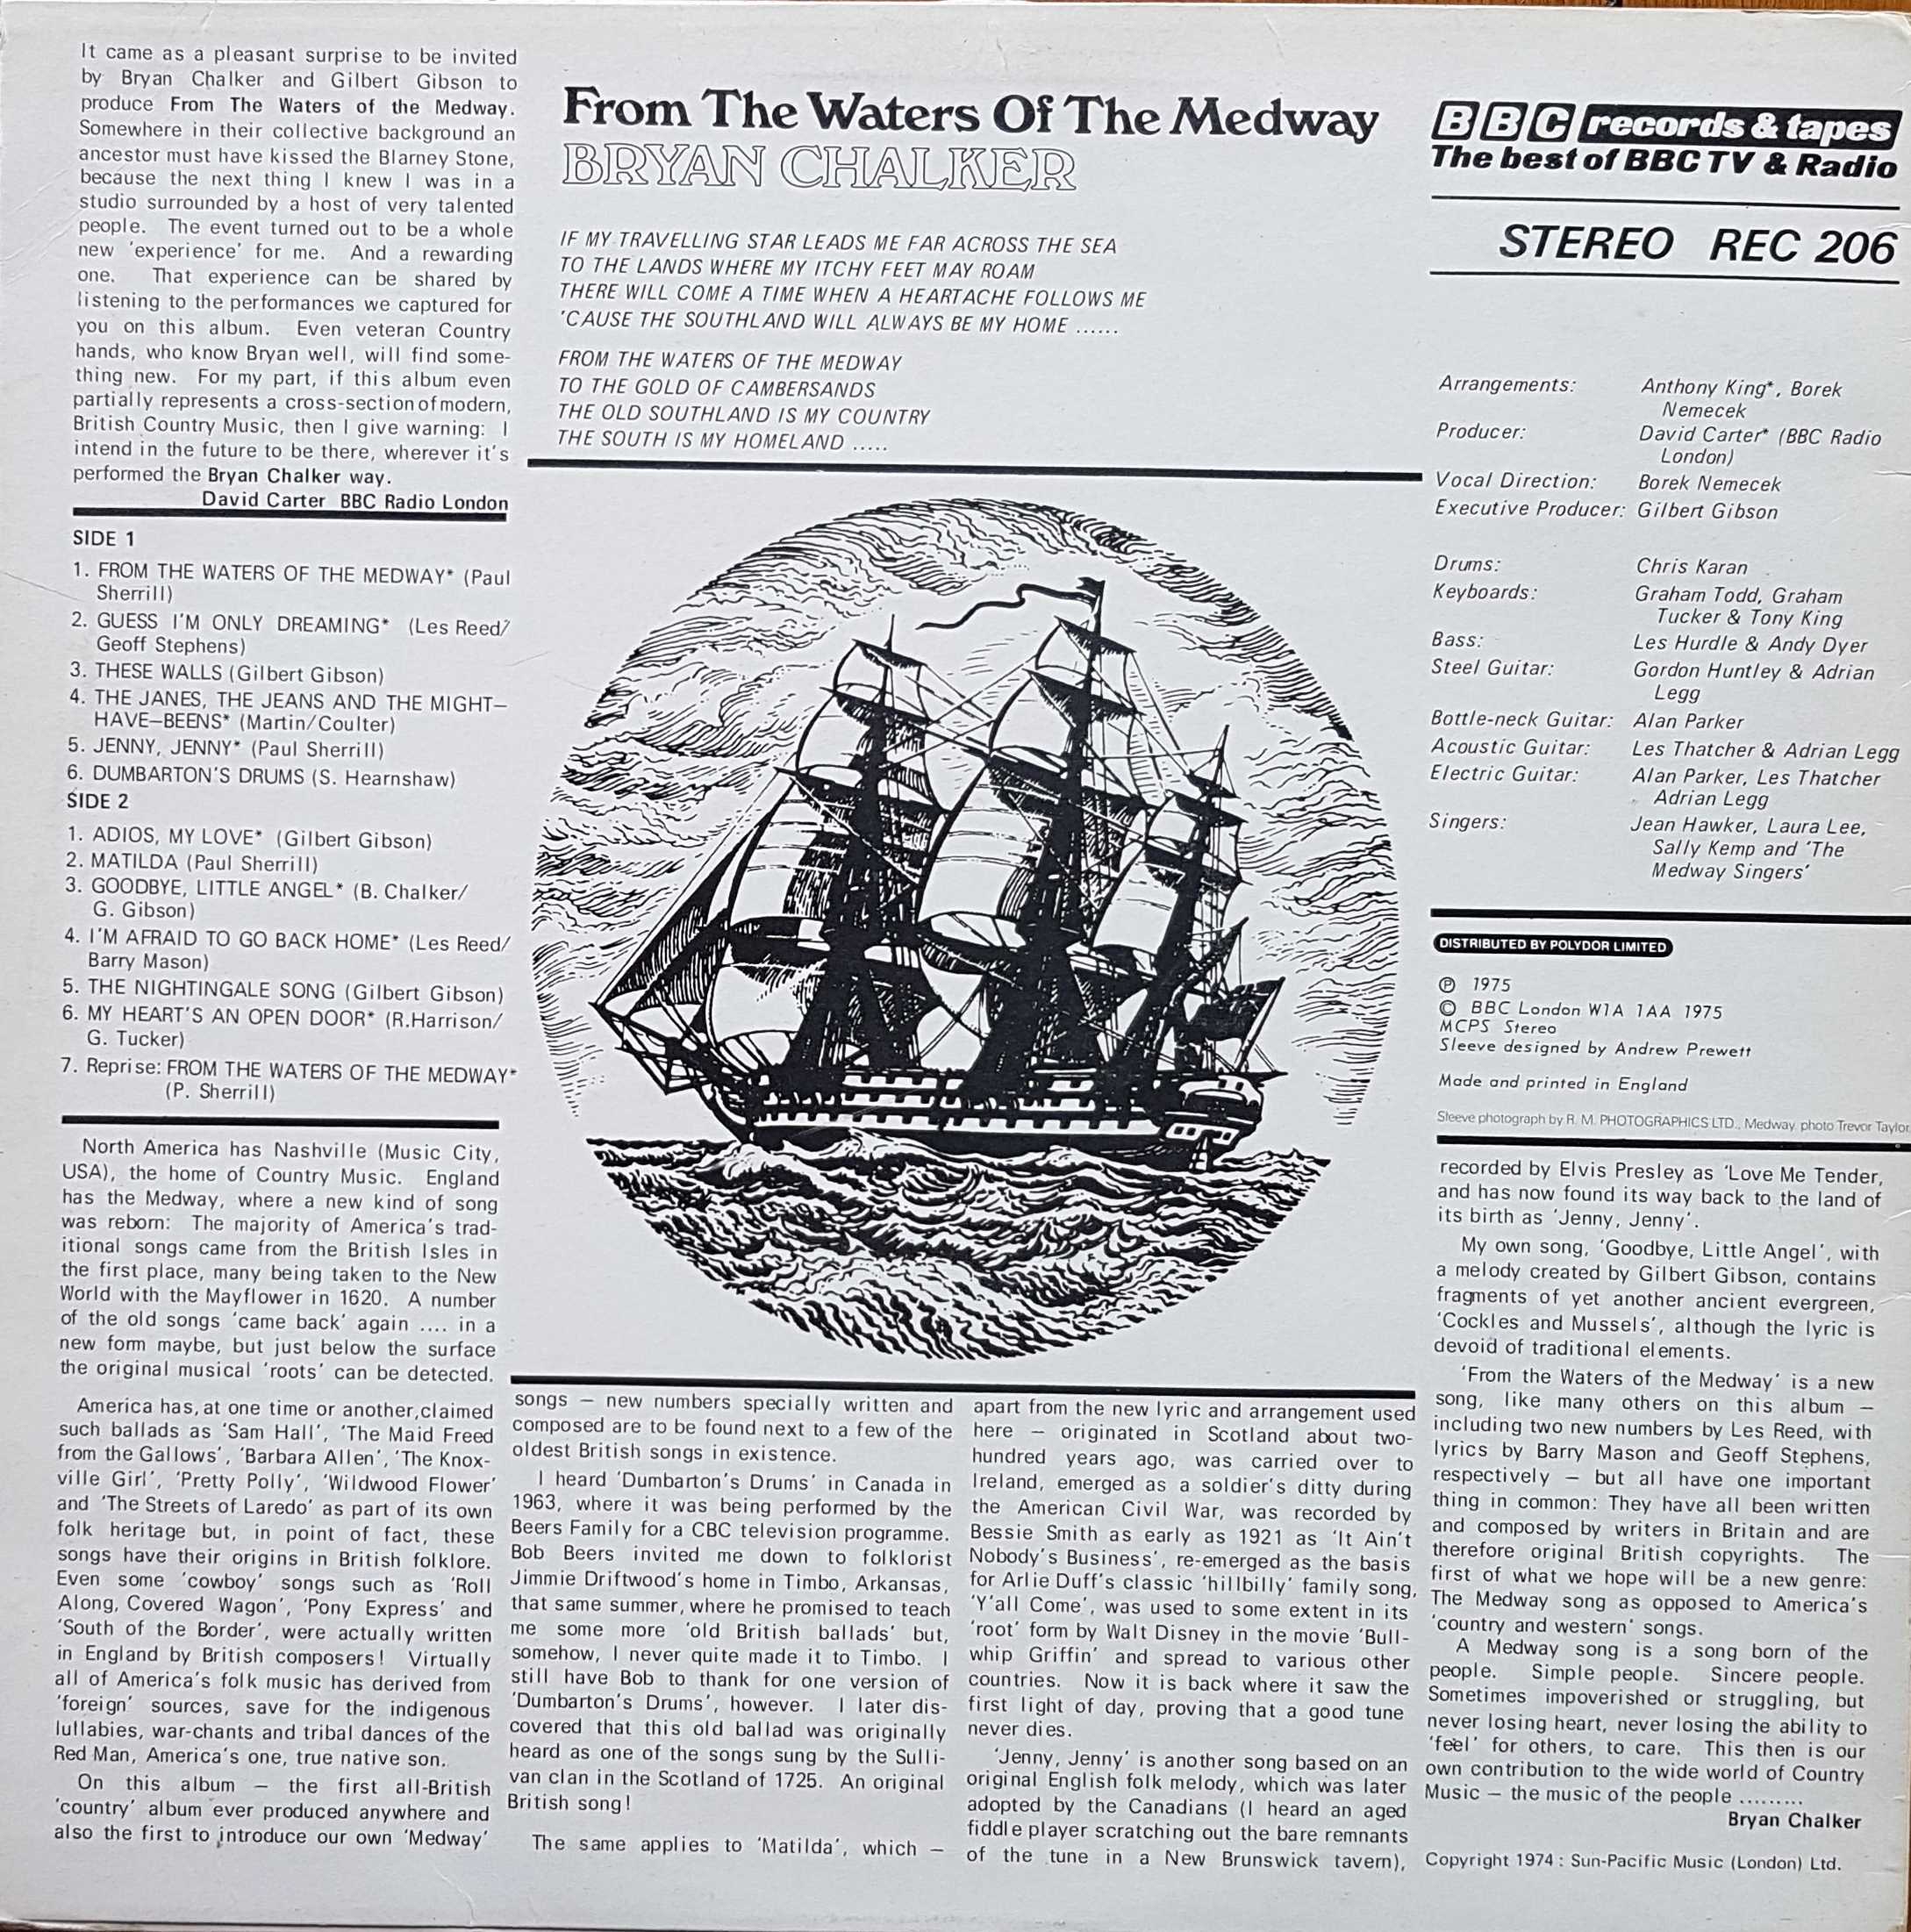 Picture of REC 206 From the waters of the Medway sound by artist Bryan Chalker from the BBC records and Tapes library